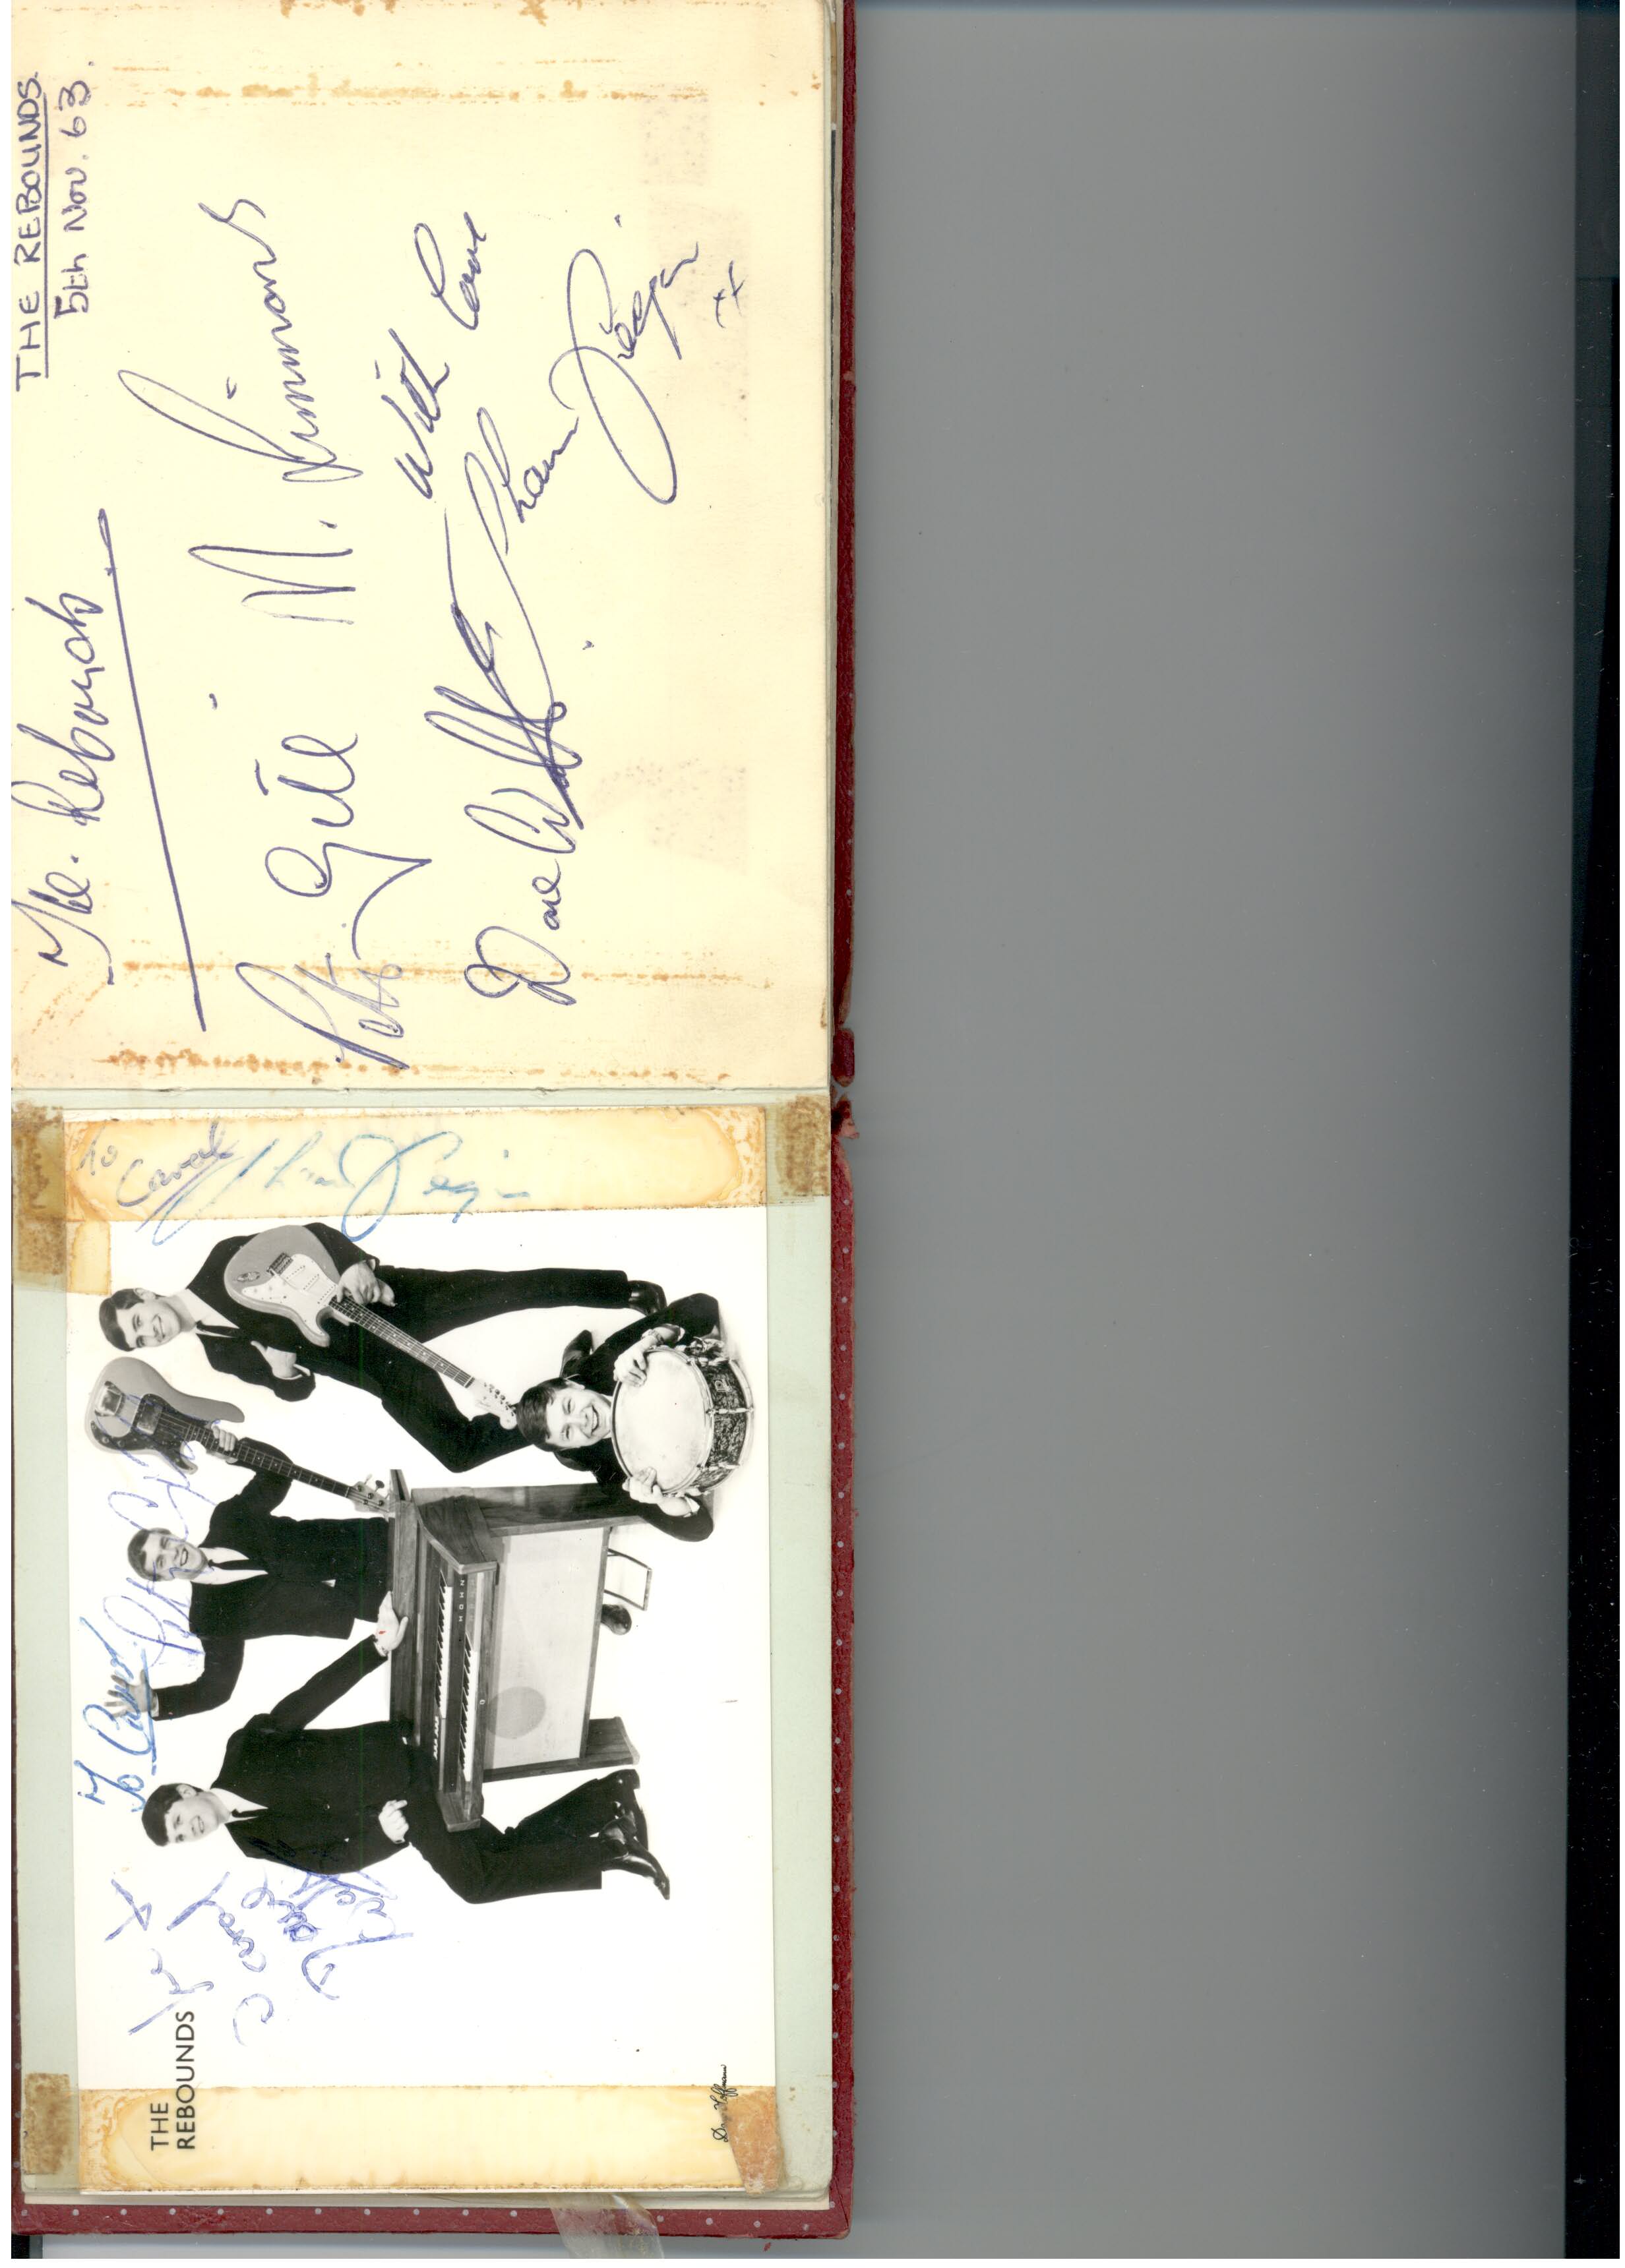 An autograph album containing signatures of Brian Jones, Keith Richards and Mick Jagger of The - Image 5 of 13